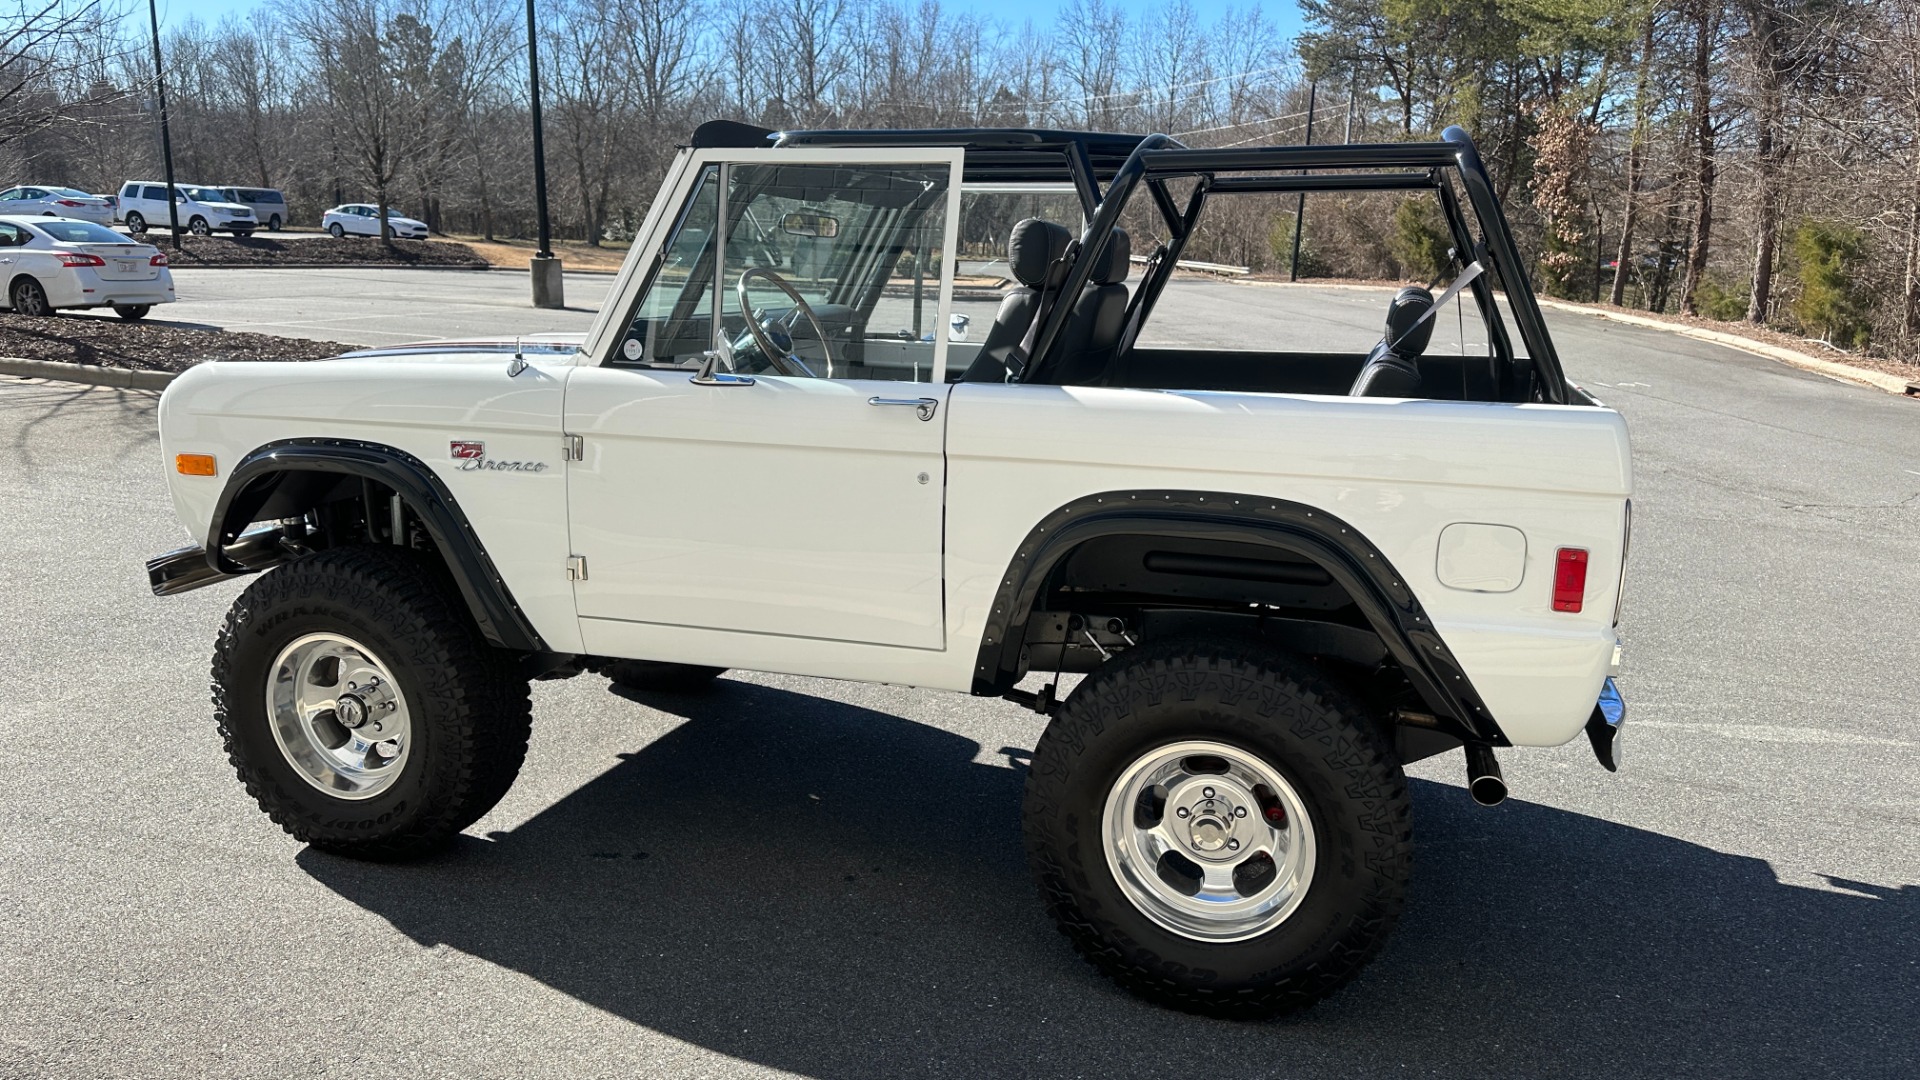 Used 1977 Ford Bronco GATEWAY EDITION / 5.0L COYOTE V8 / FRAME OFF RESTORATION / LEATHER / A/C for sale $225,000 at Formula Imports in Charlotte NC 28227 6